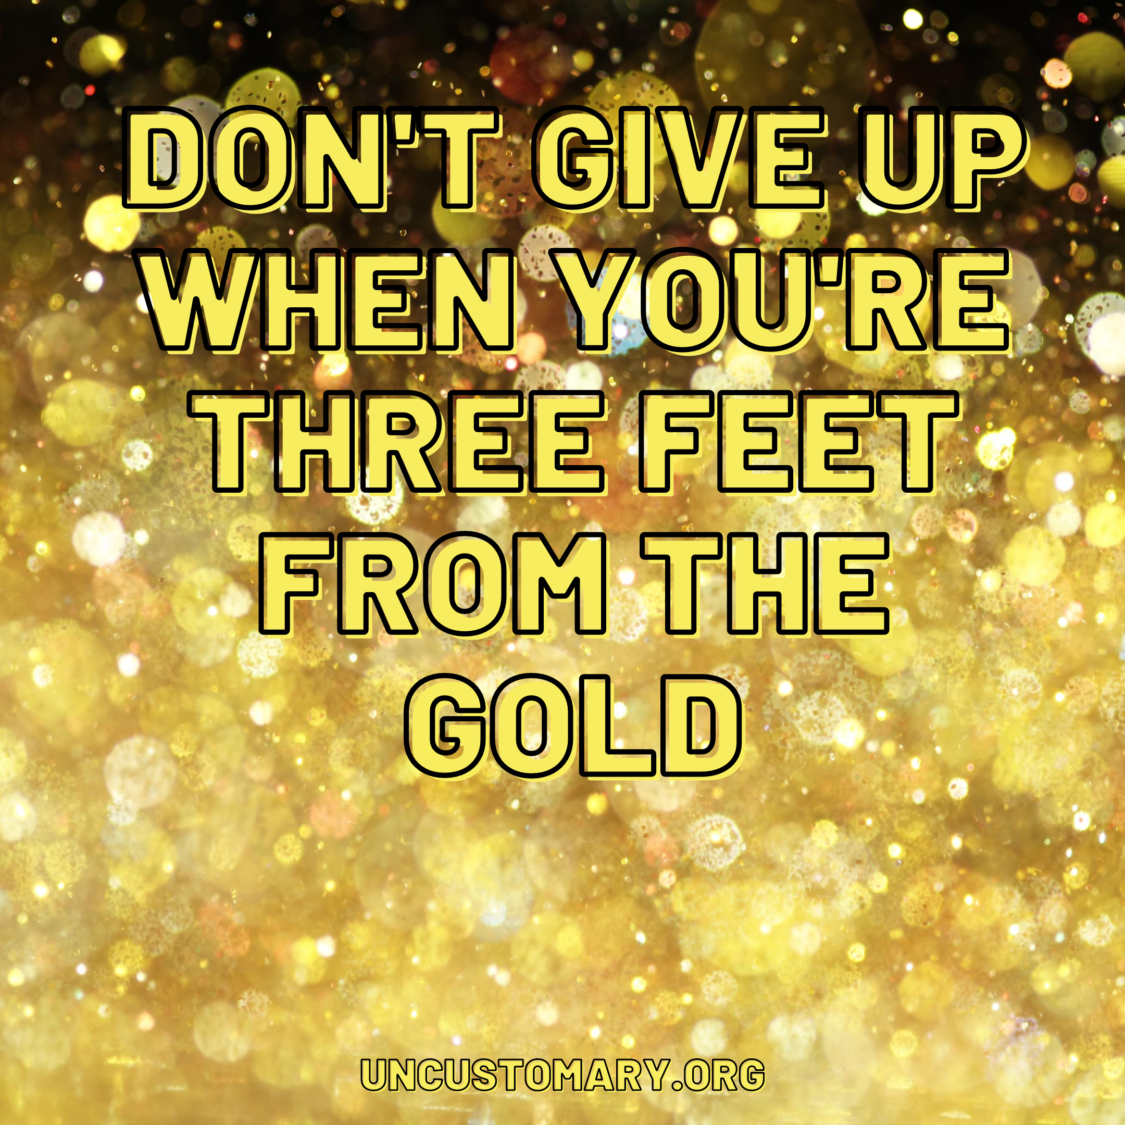 Don’t Give Up When You’re Three Feet From The Gold